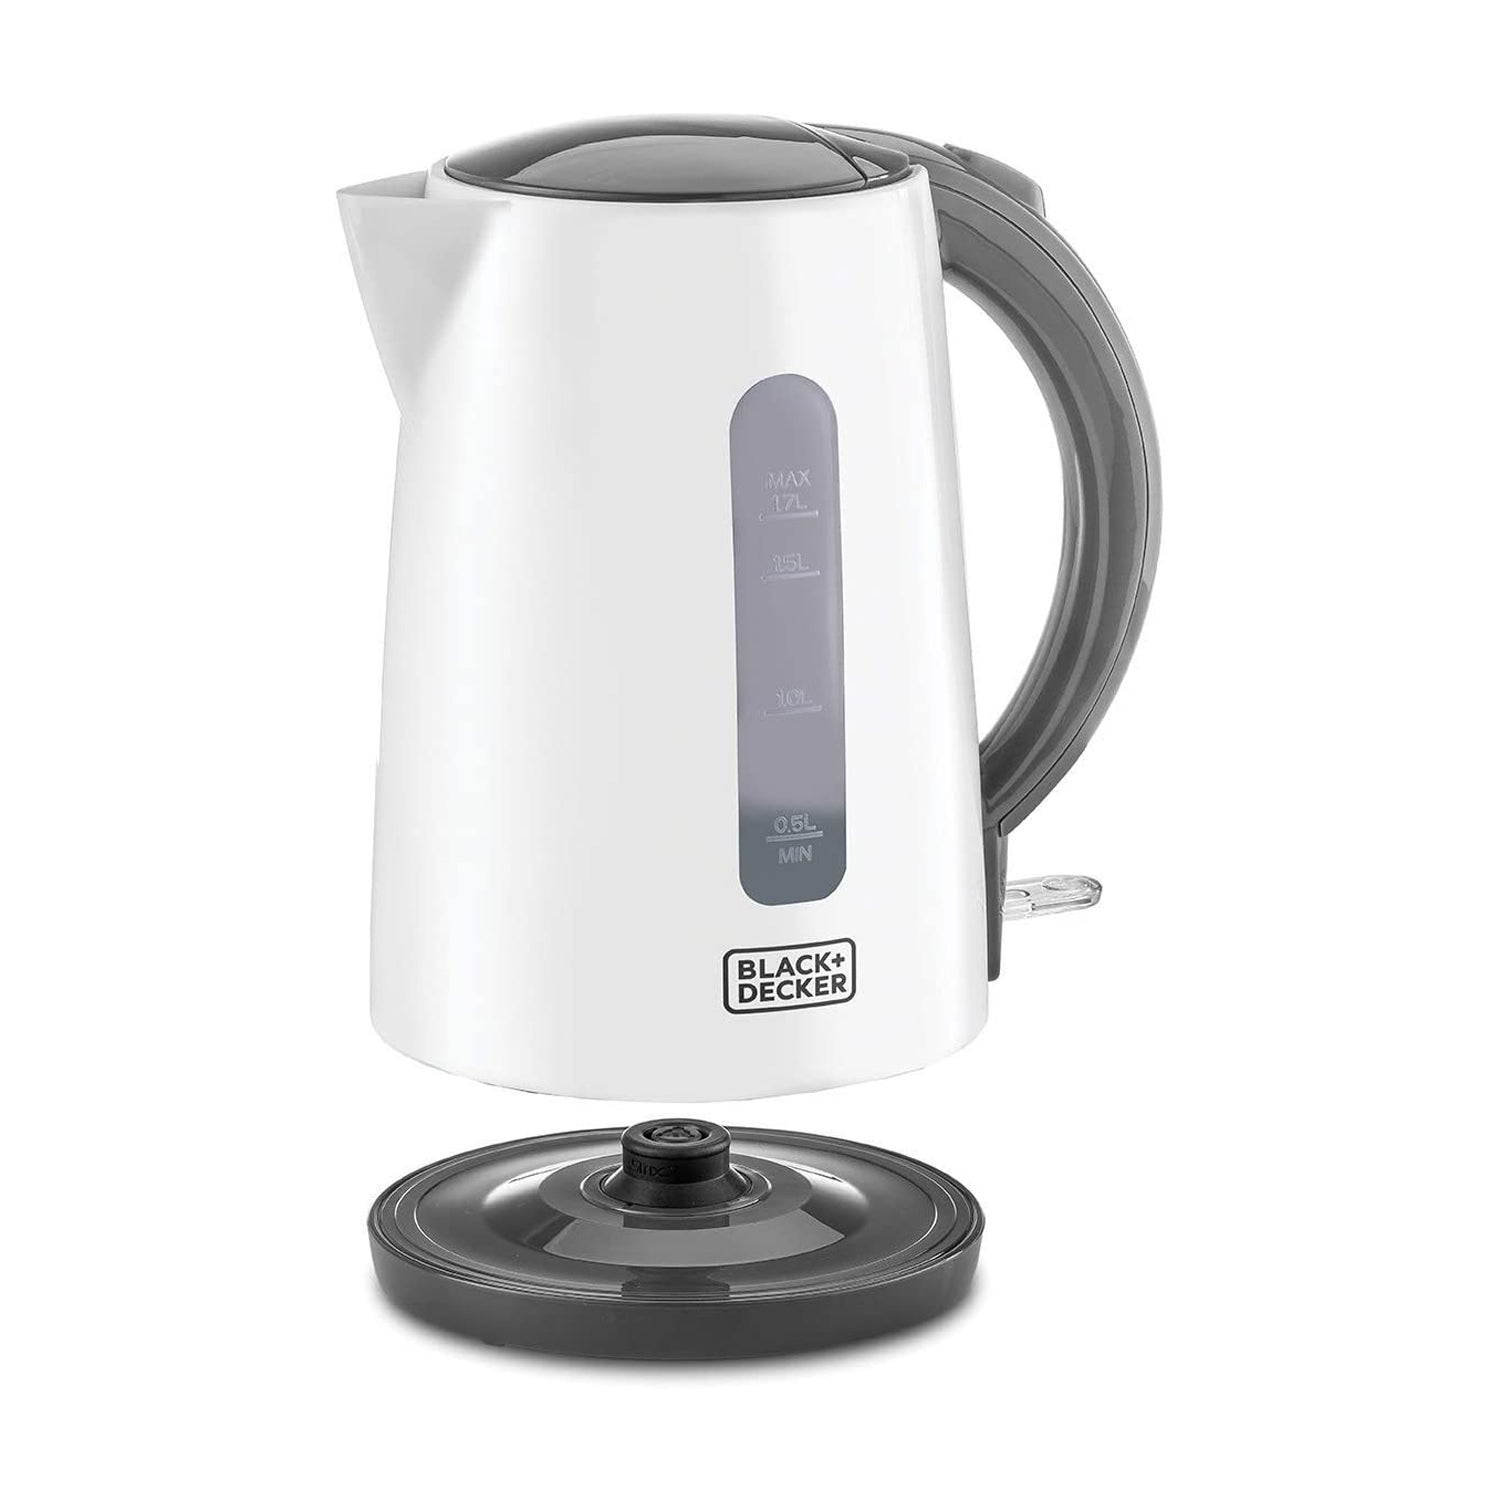 BLACK+DECKER 2200W 1.7L Cordless Electric Kettle With Water-Level Indicator, Removable Filter, Auto Shut-Off And BPA Free, Perfect for Warm Beverages JC70 2 Years Warranty